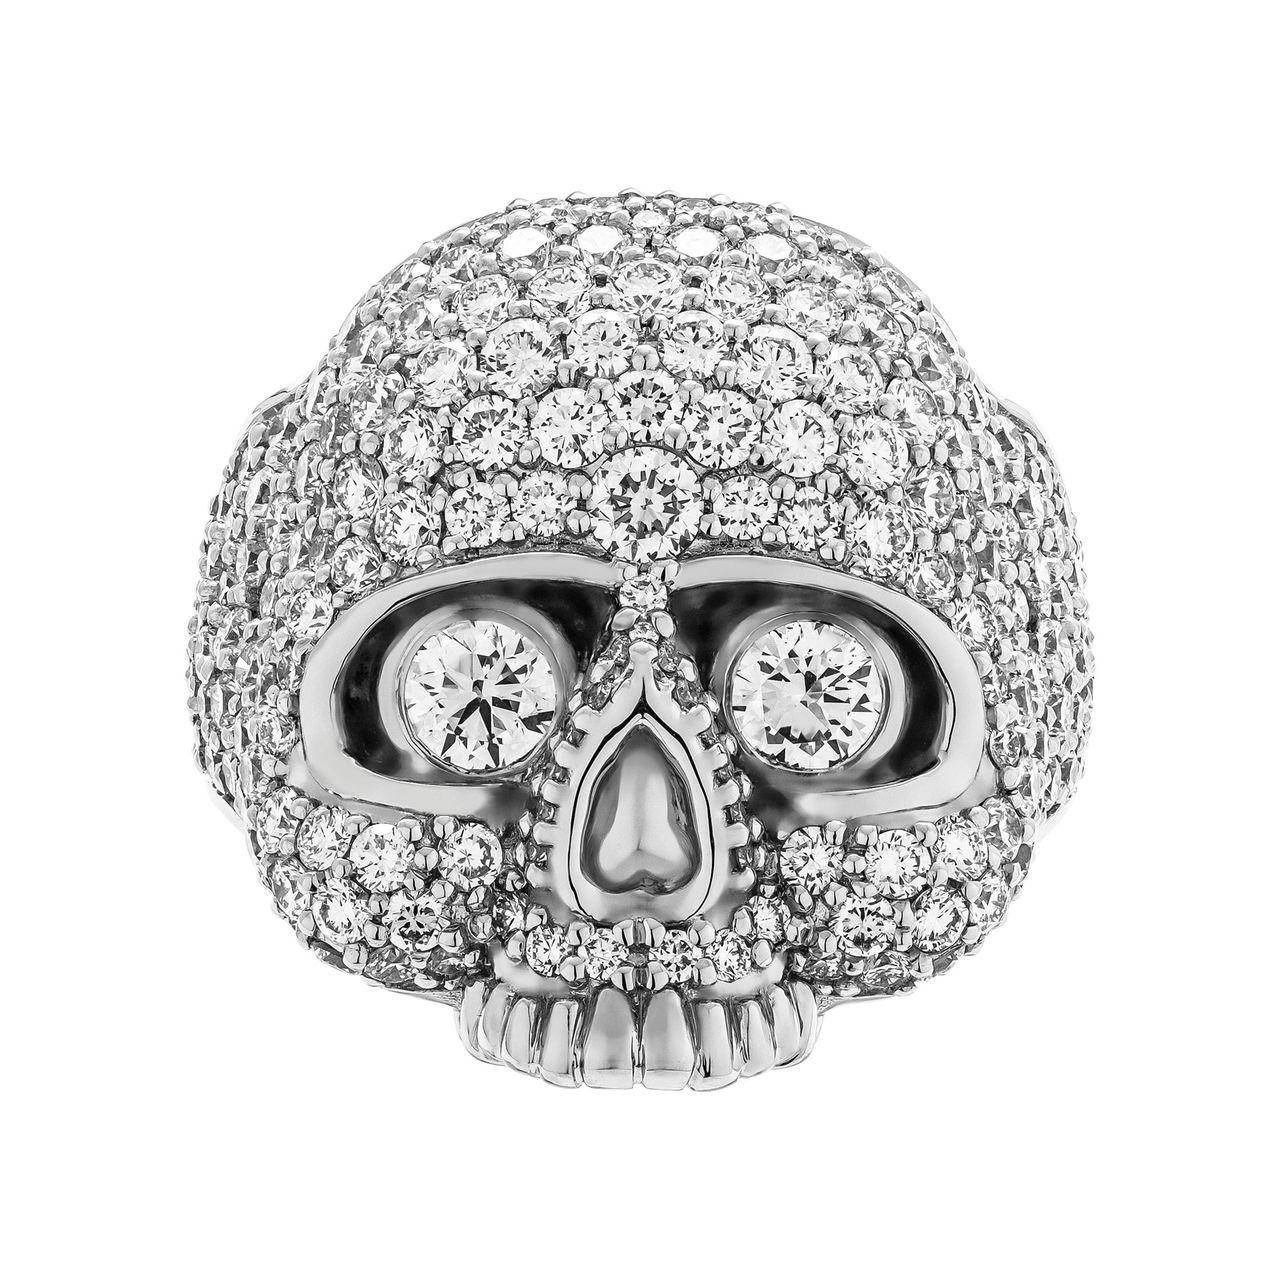 Skull jewelry is always a hot item on runways and among celebrities in Hollywood.
 Take your pick of the loot with this crowned skull ring expertly handcrafted in gleaming Platinum and amazingly iced out with 6 carat white diamonds. 
The skull's